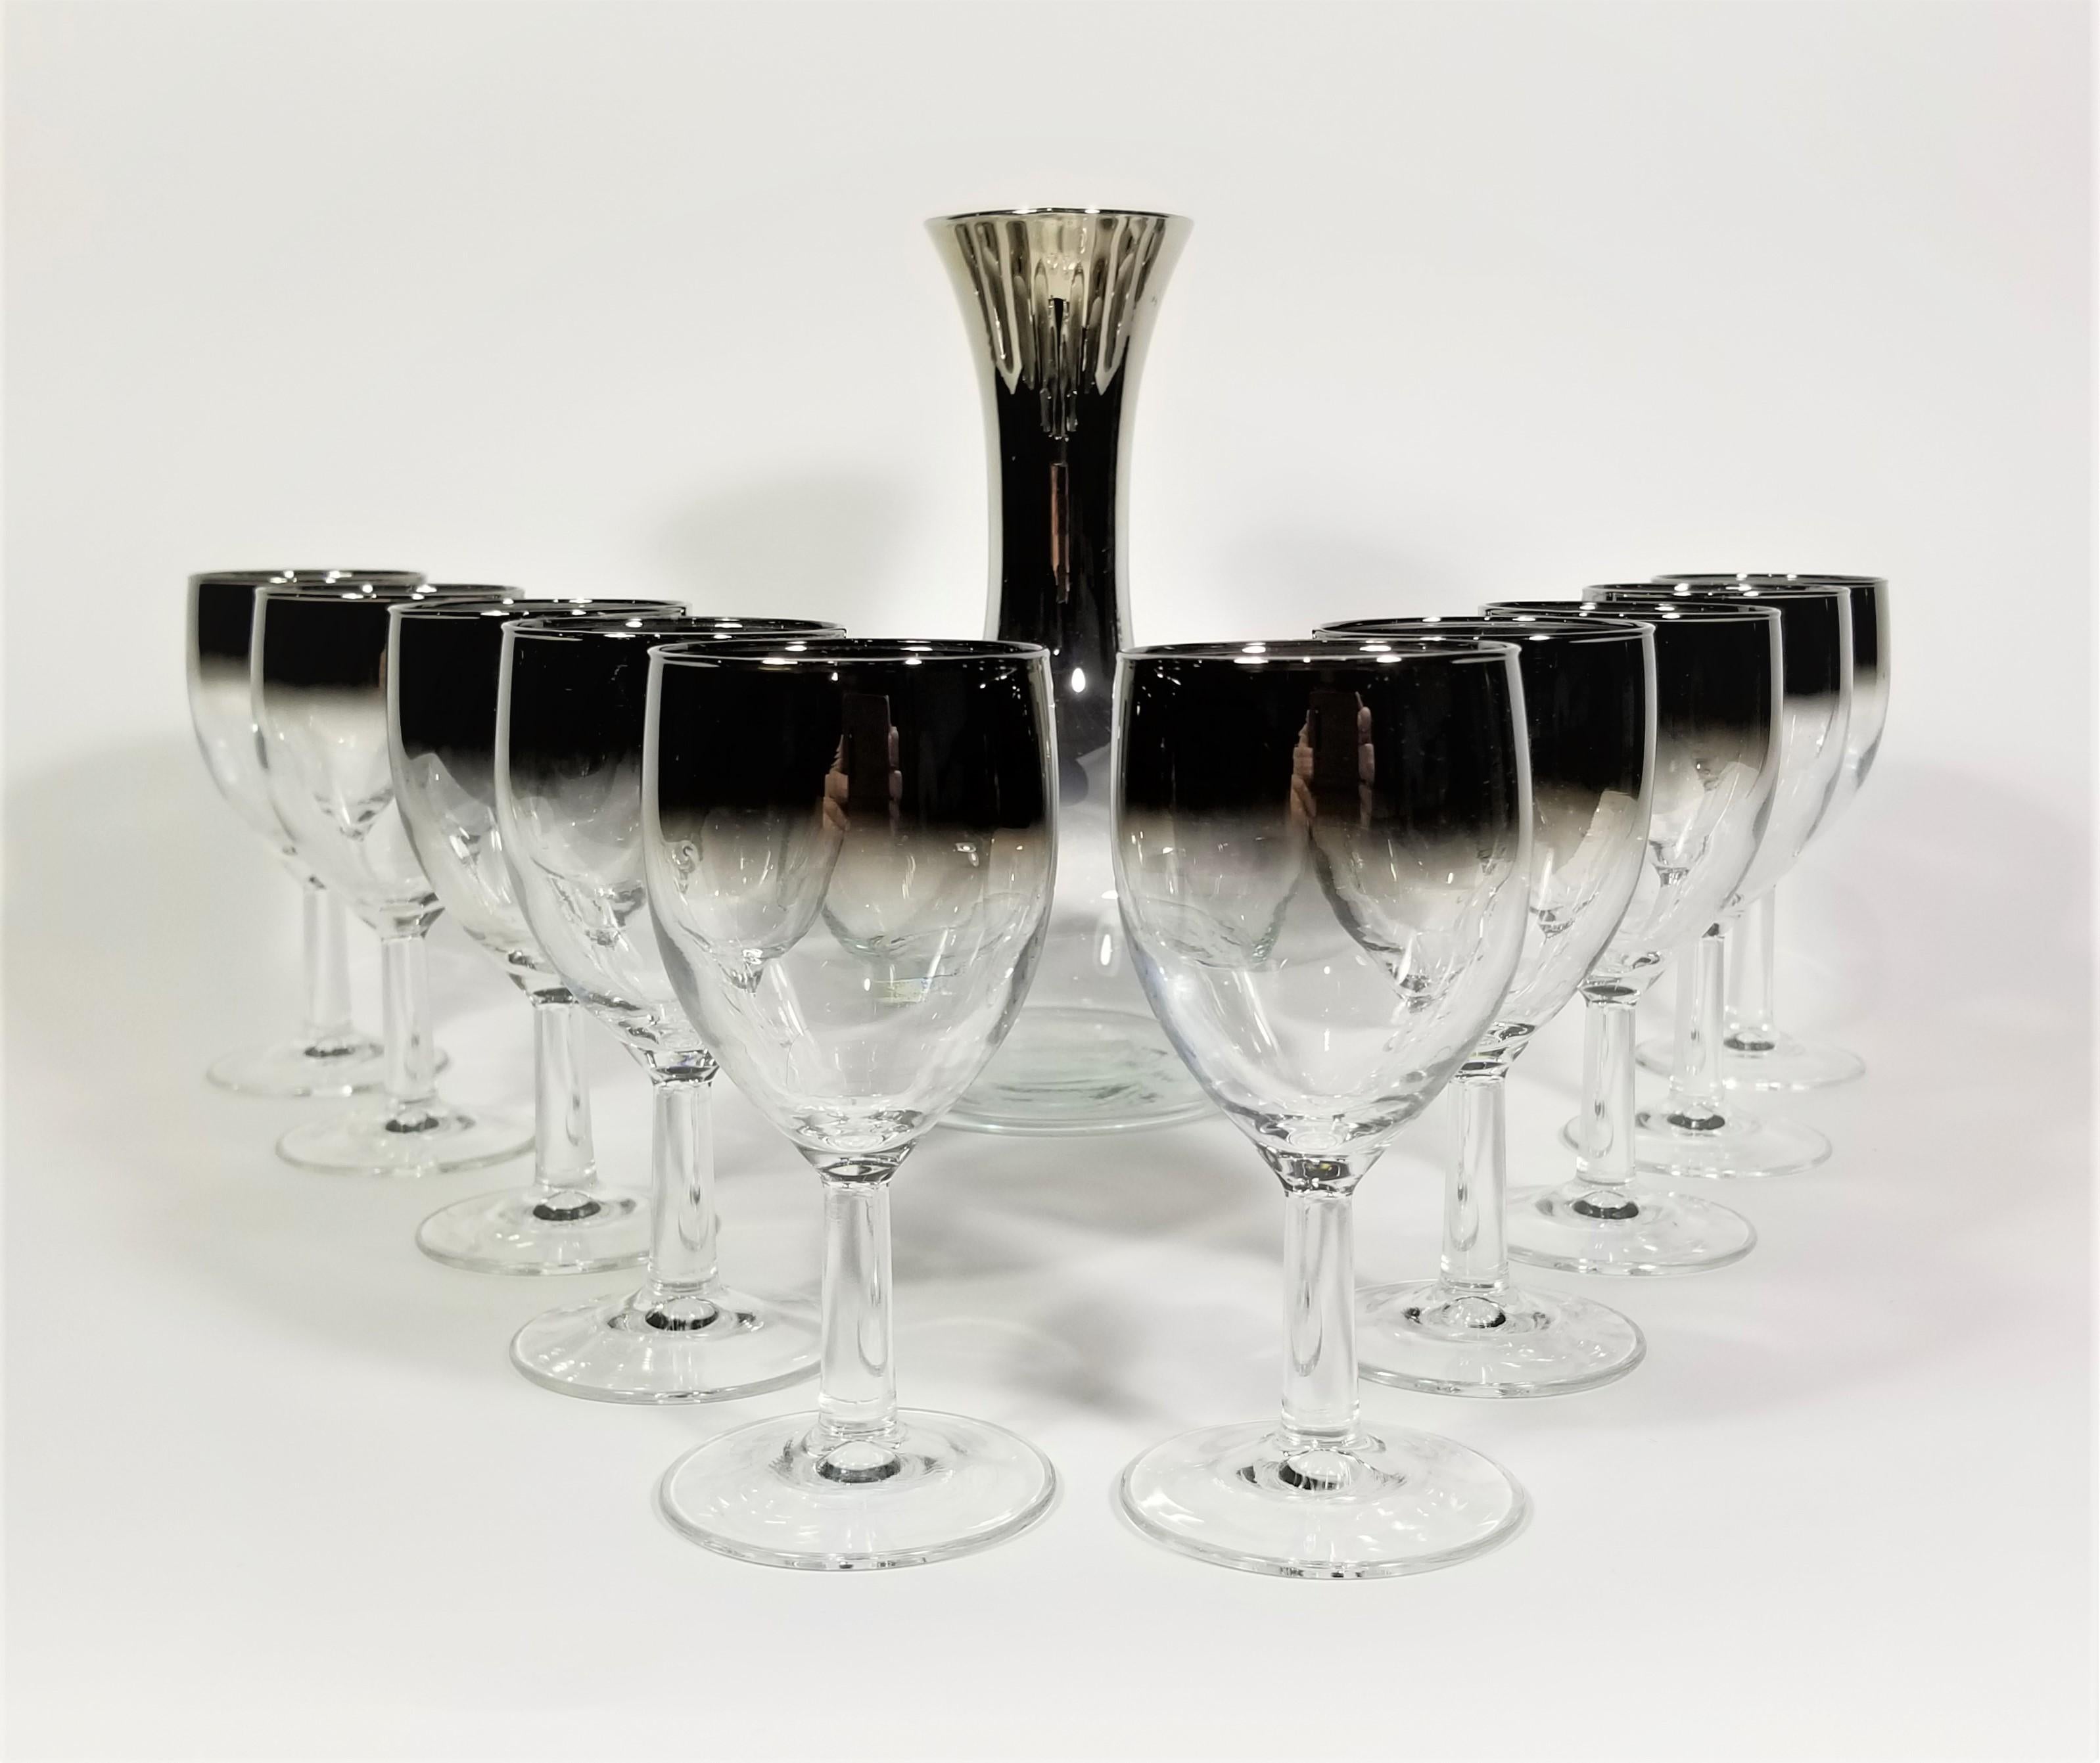 20th Century French Glassware Barware Mid-Century 1960s, Made in France  For Sale